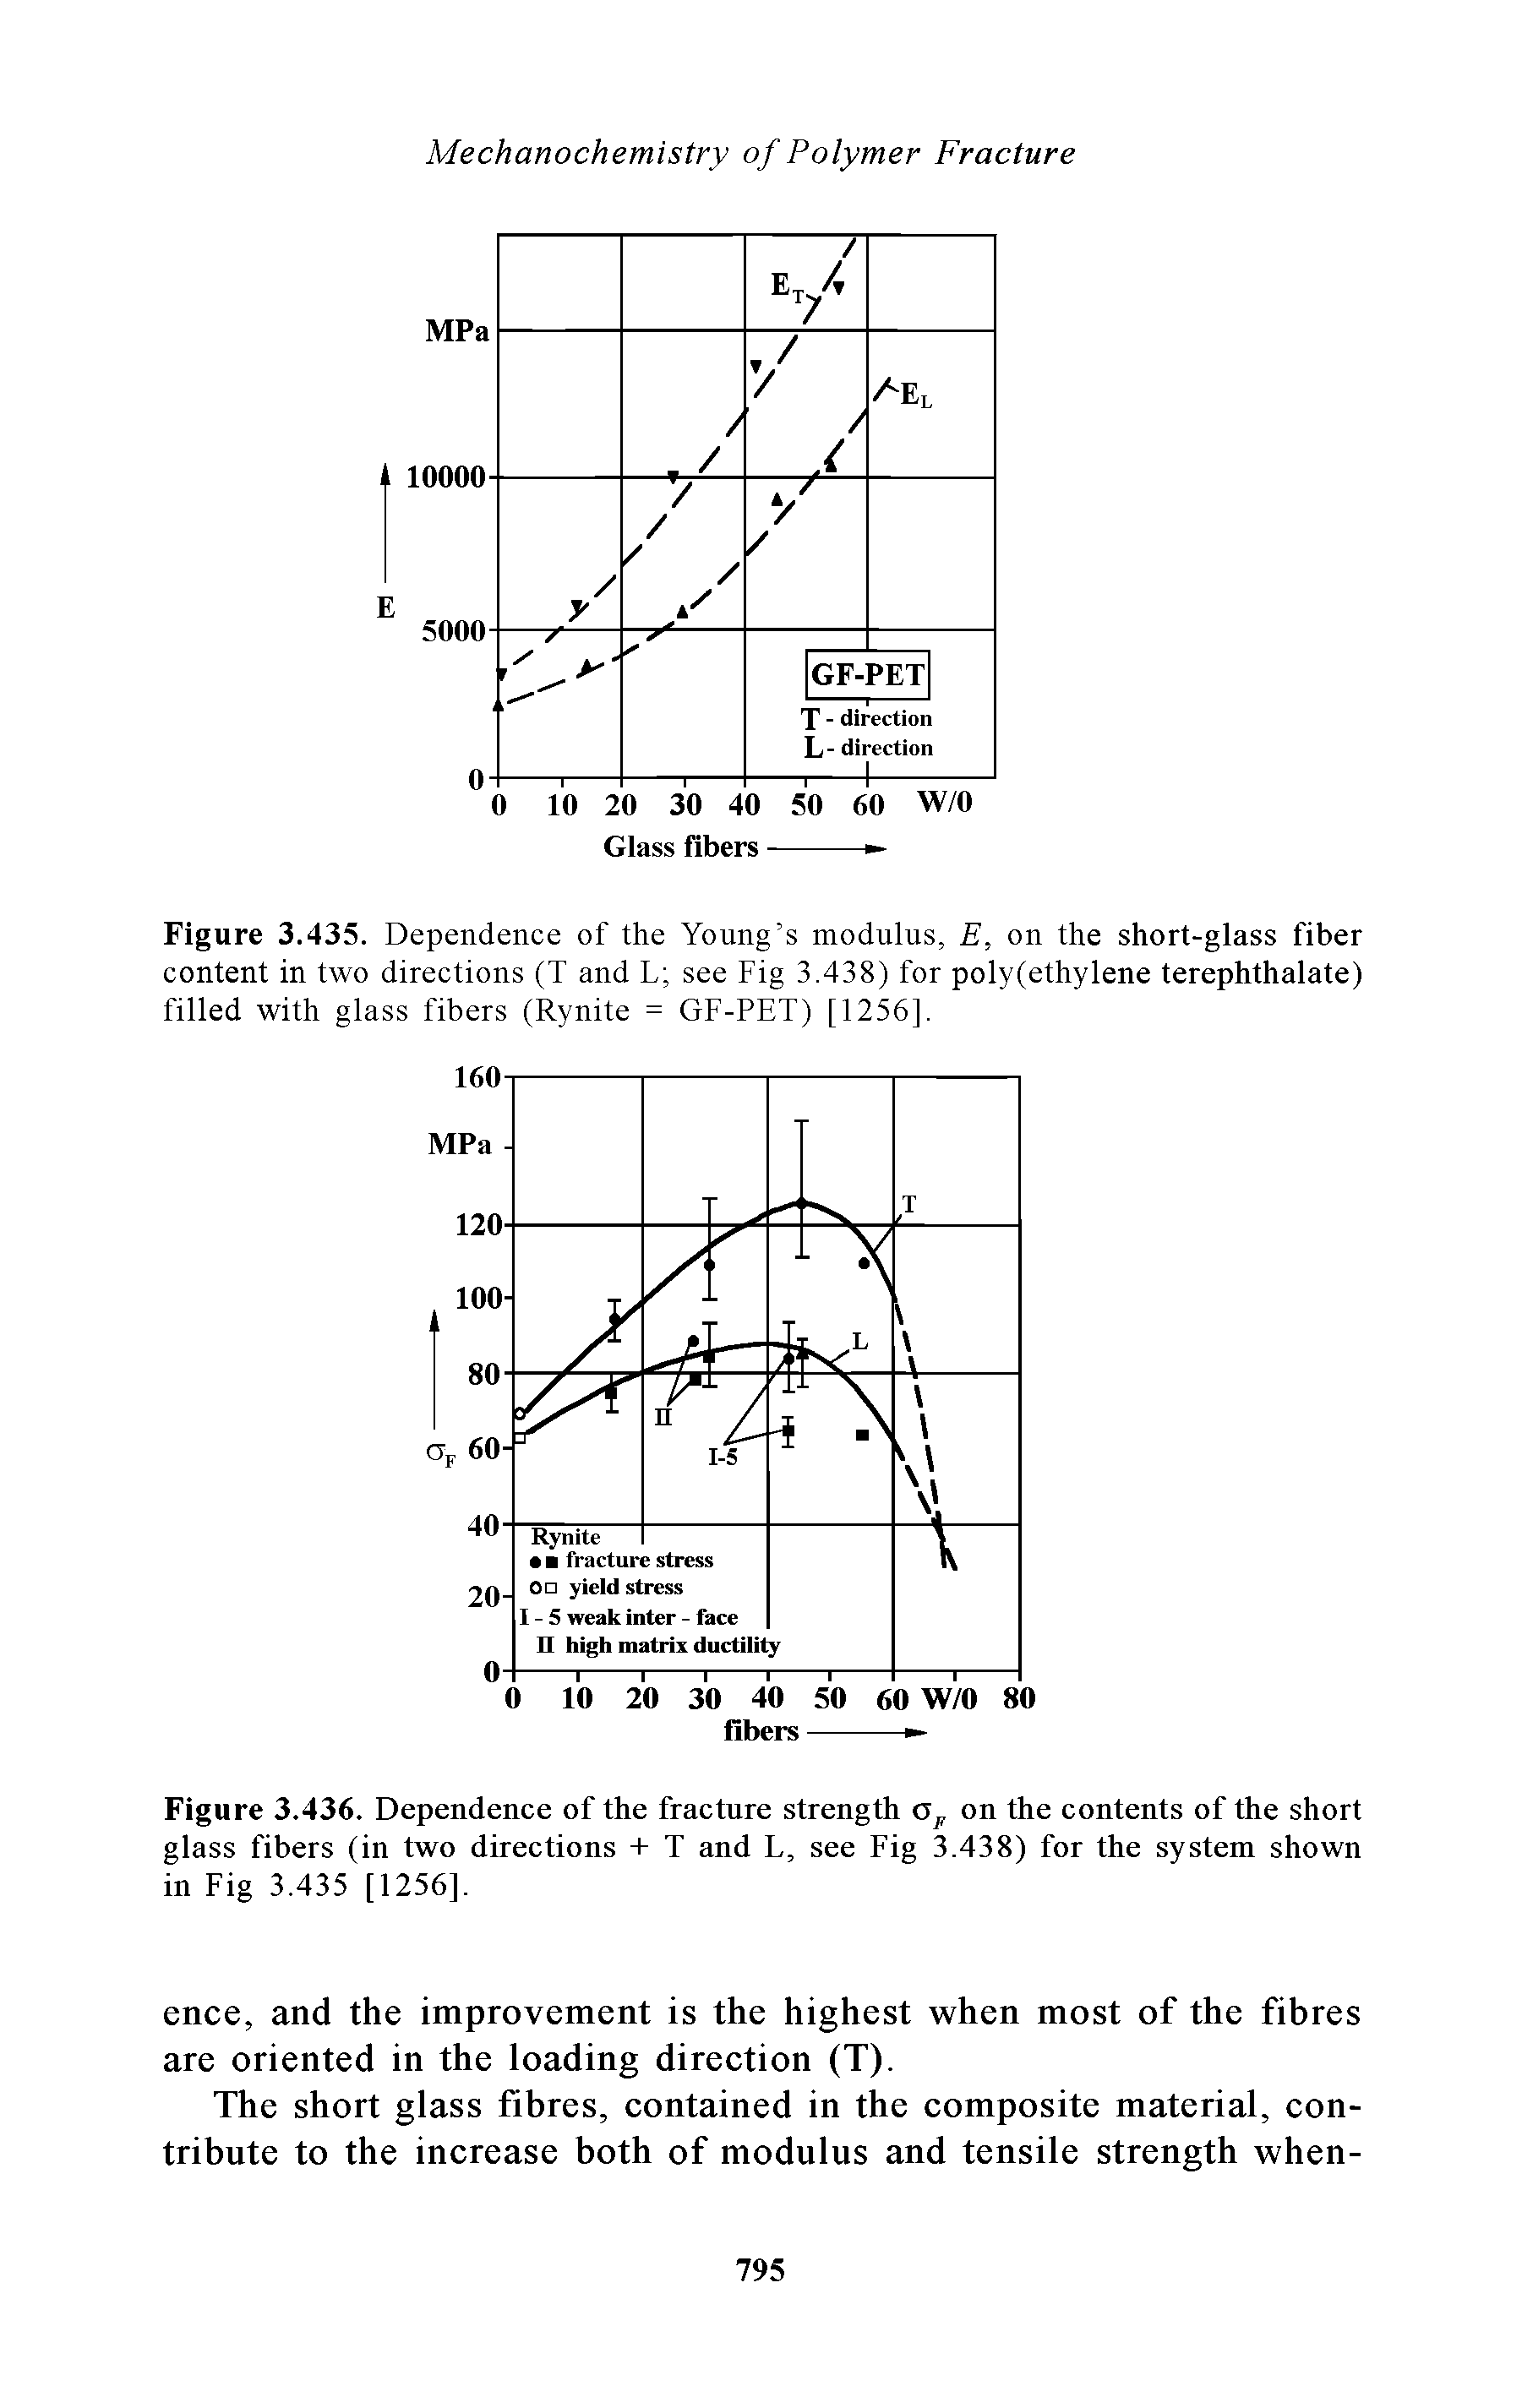 Figure 3.435. Dependence of the Young s modulus, E, on the short-glass fiber content in two directions (T and L see Fig 3.438) for poly(ethylene terephthalate) filled with glass fibers (Rynite = GF-PET) [1256],...